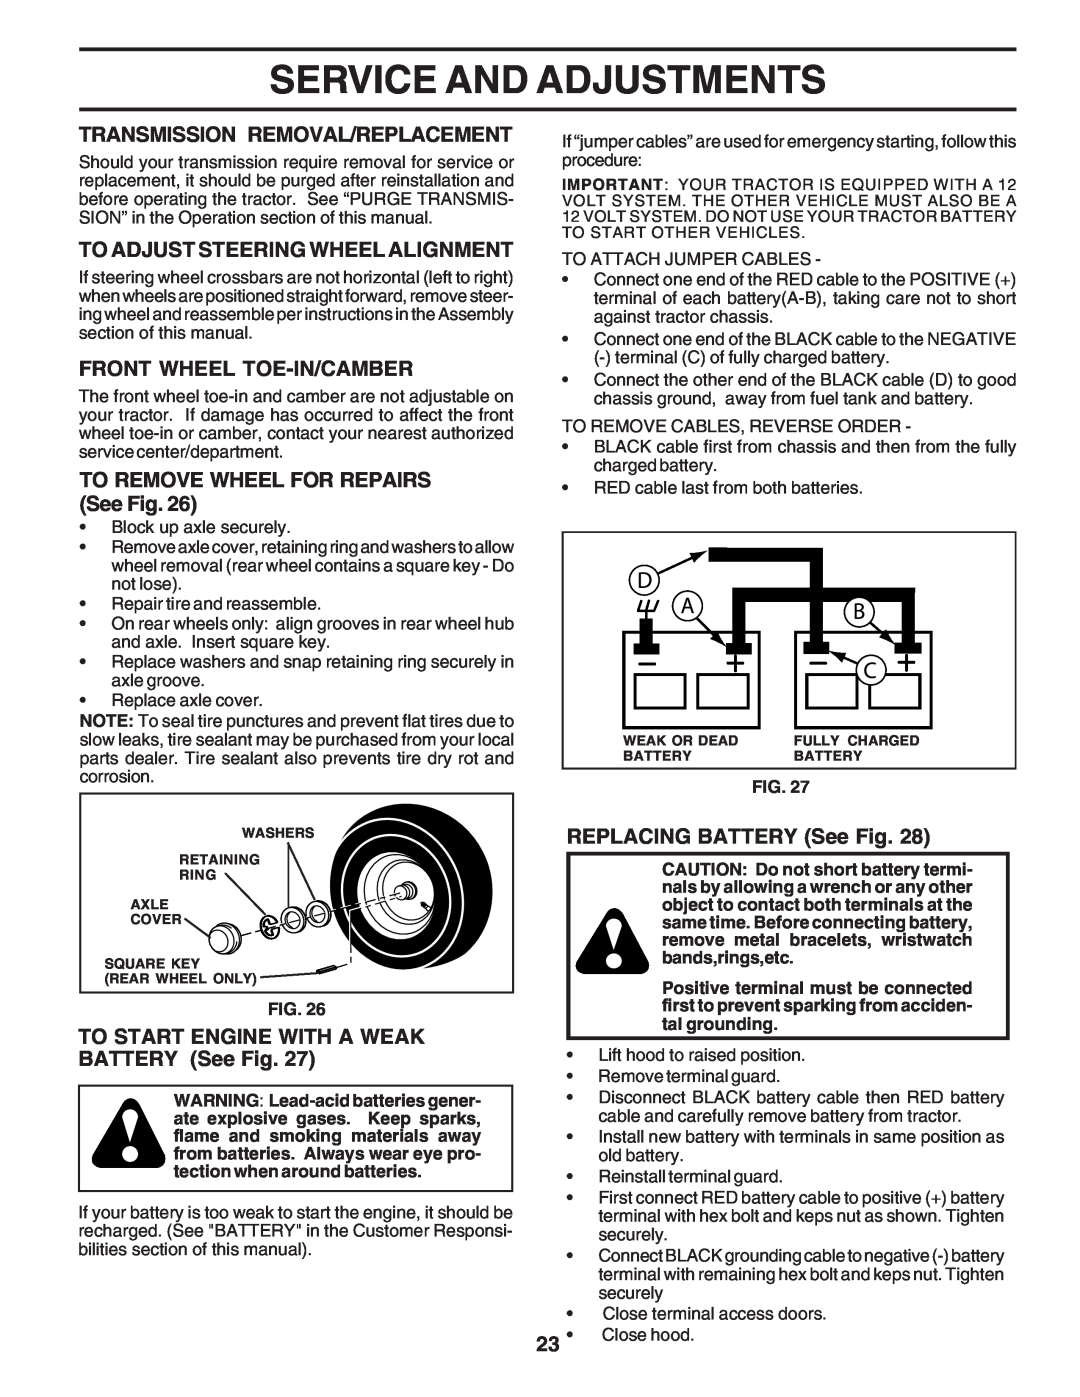 Poulan 183284 owner manual Transmission Removal/Replacement, To Adjust Steering Wheel Alignment, Front Wheel Toe-In/Camber 